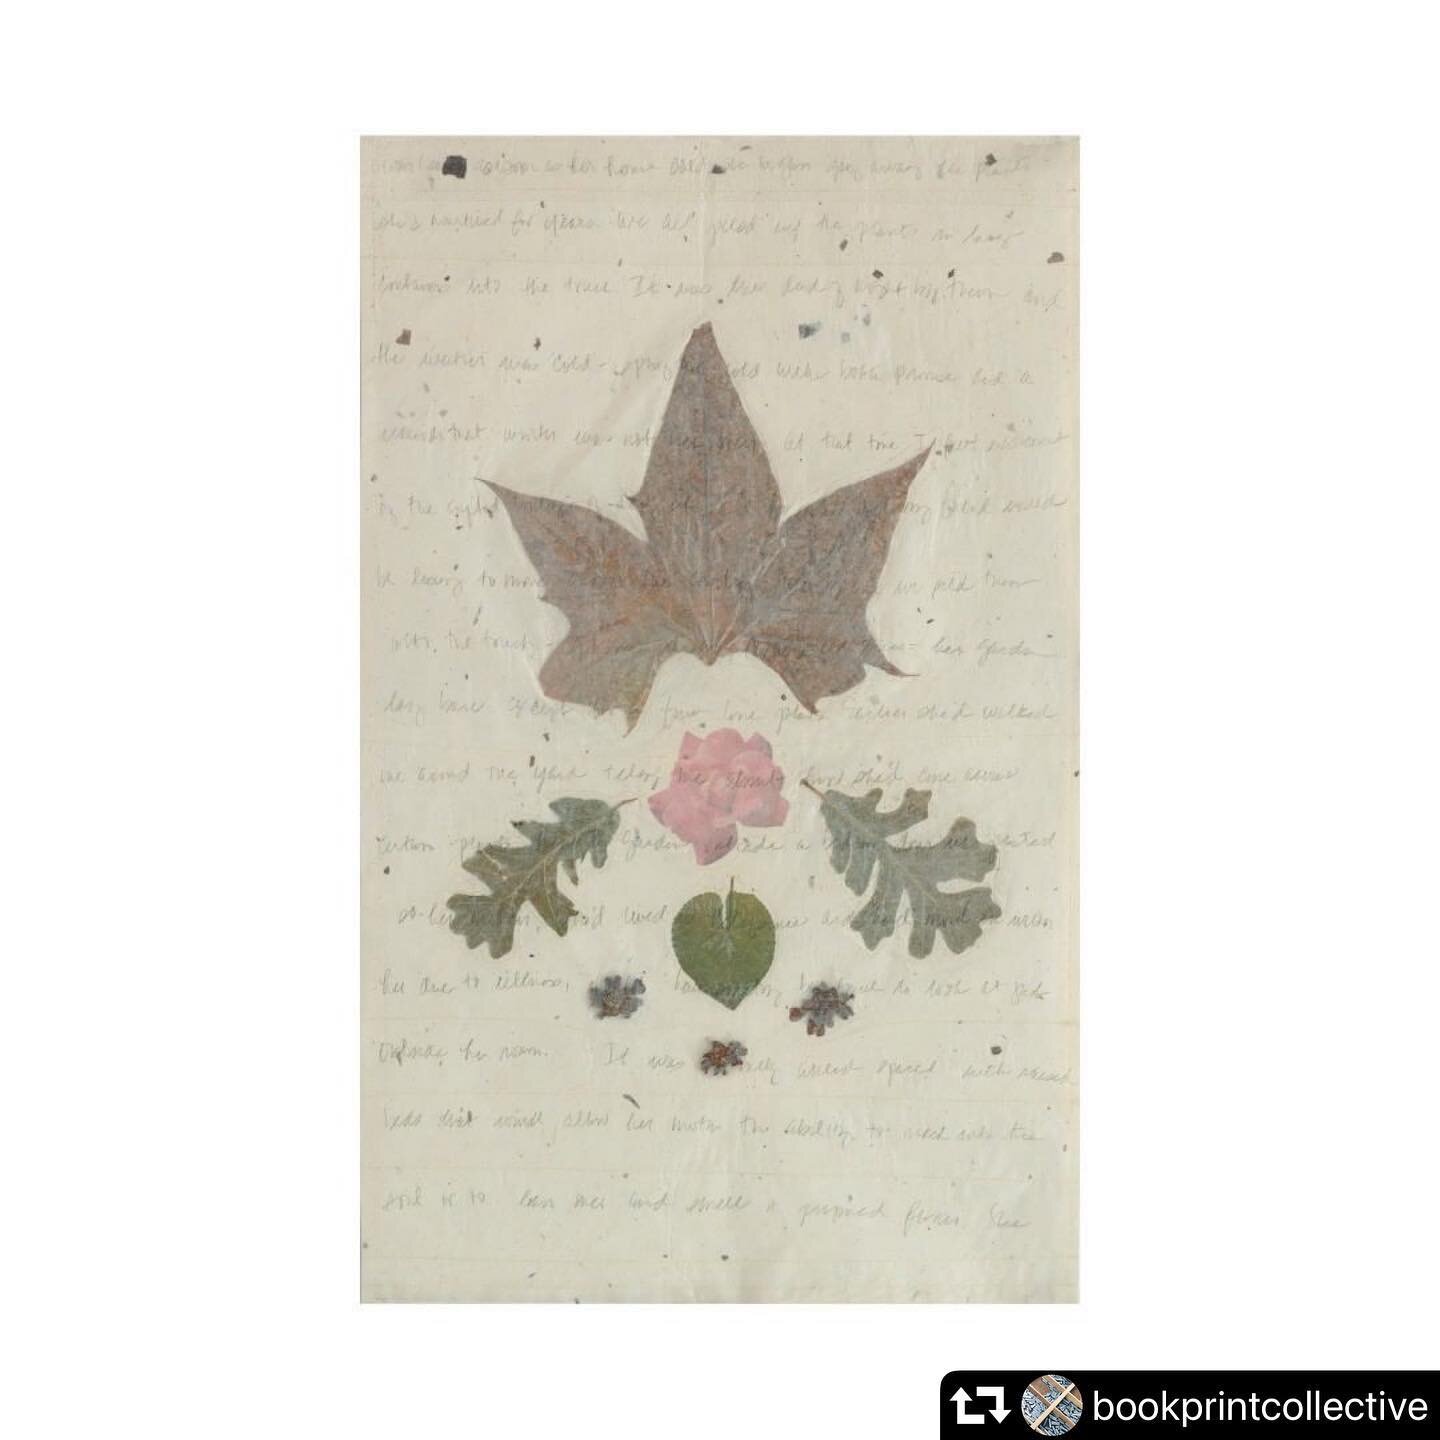 @bookprintcollective
Takeover Day 3
@societyofcraft 
Central Rose, Maple, Oak - 23&quot;H x 14&quot;W; Paper, thread, graphite, pigment print, leaves (maple, oak), zinnias

#alisabanks #abanksart #artistbooks #bookart #mixedmediaart #multimediaart #s